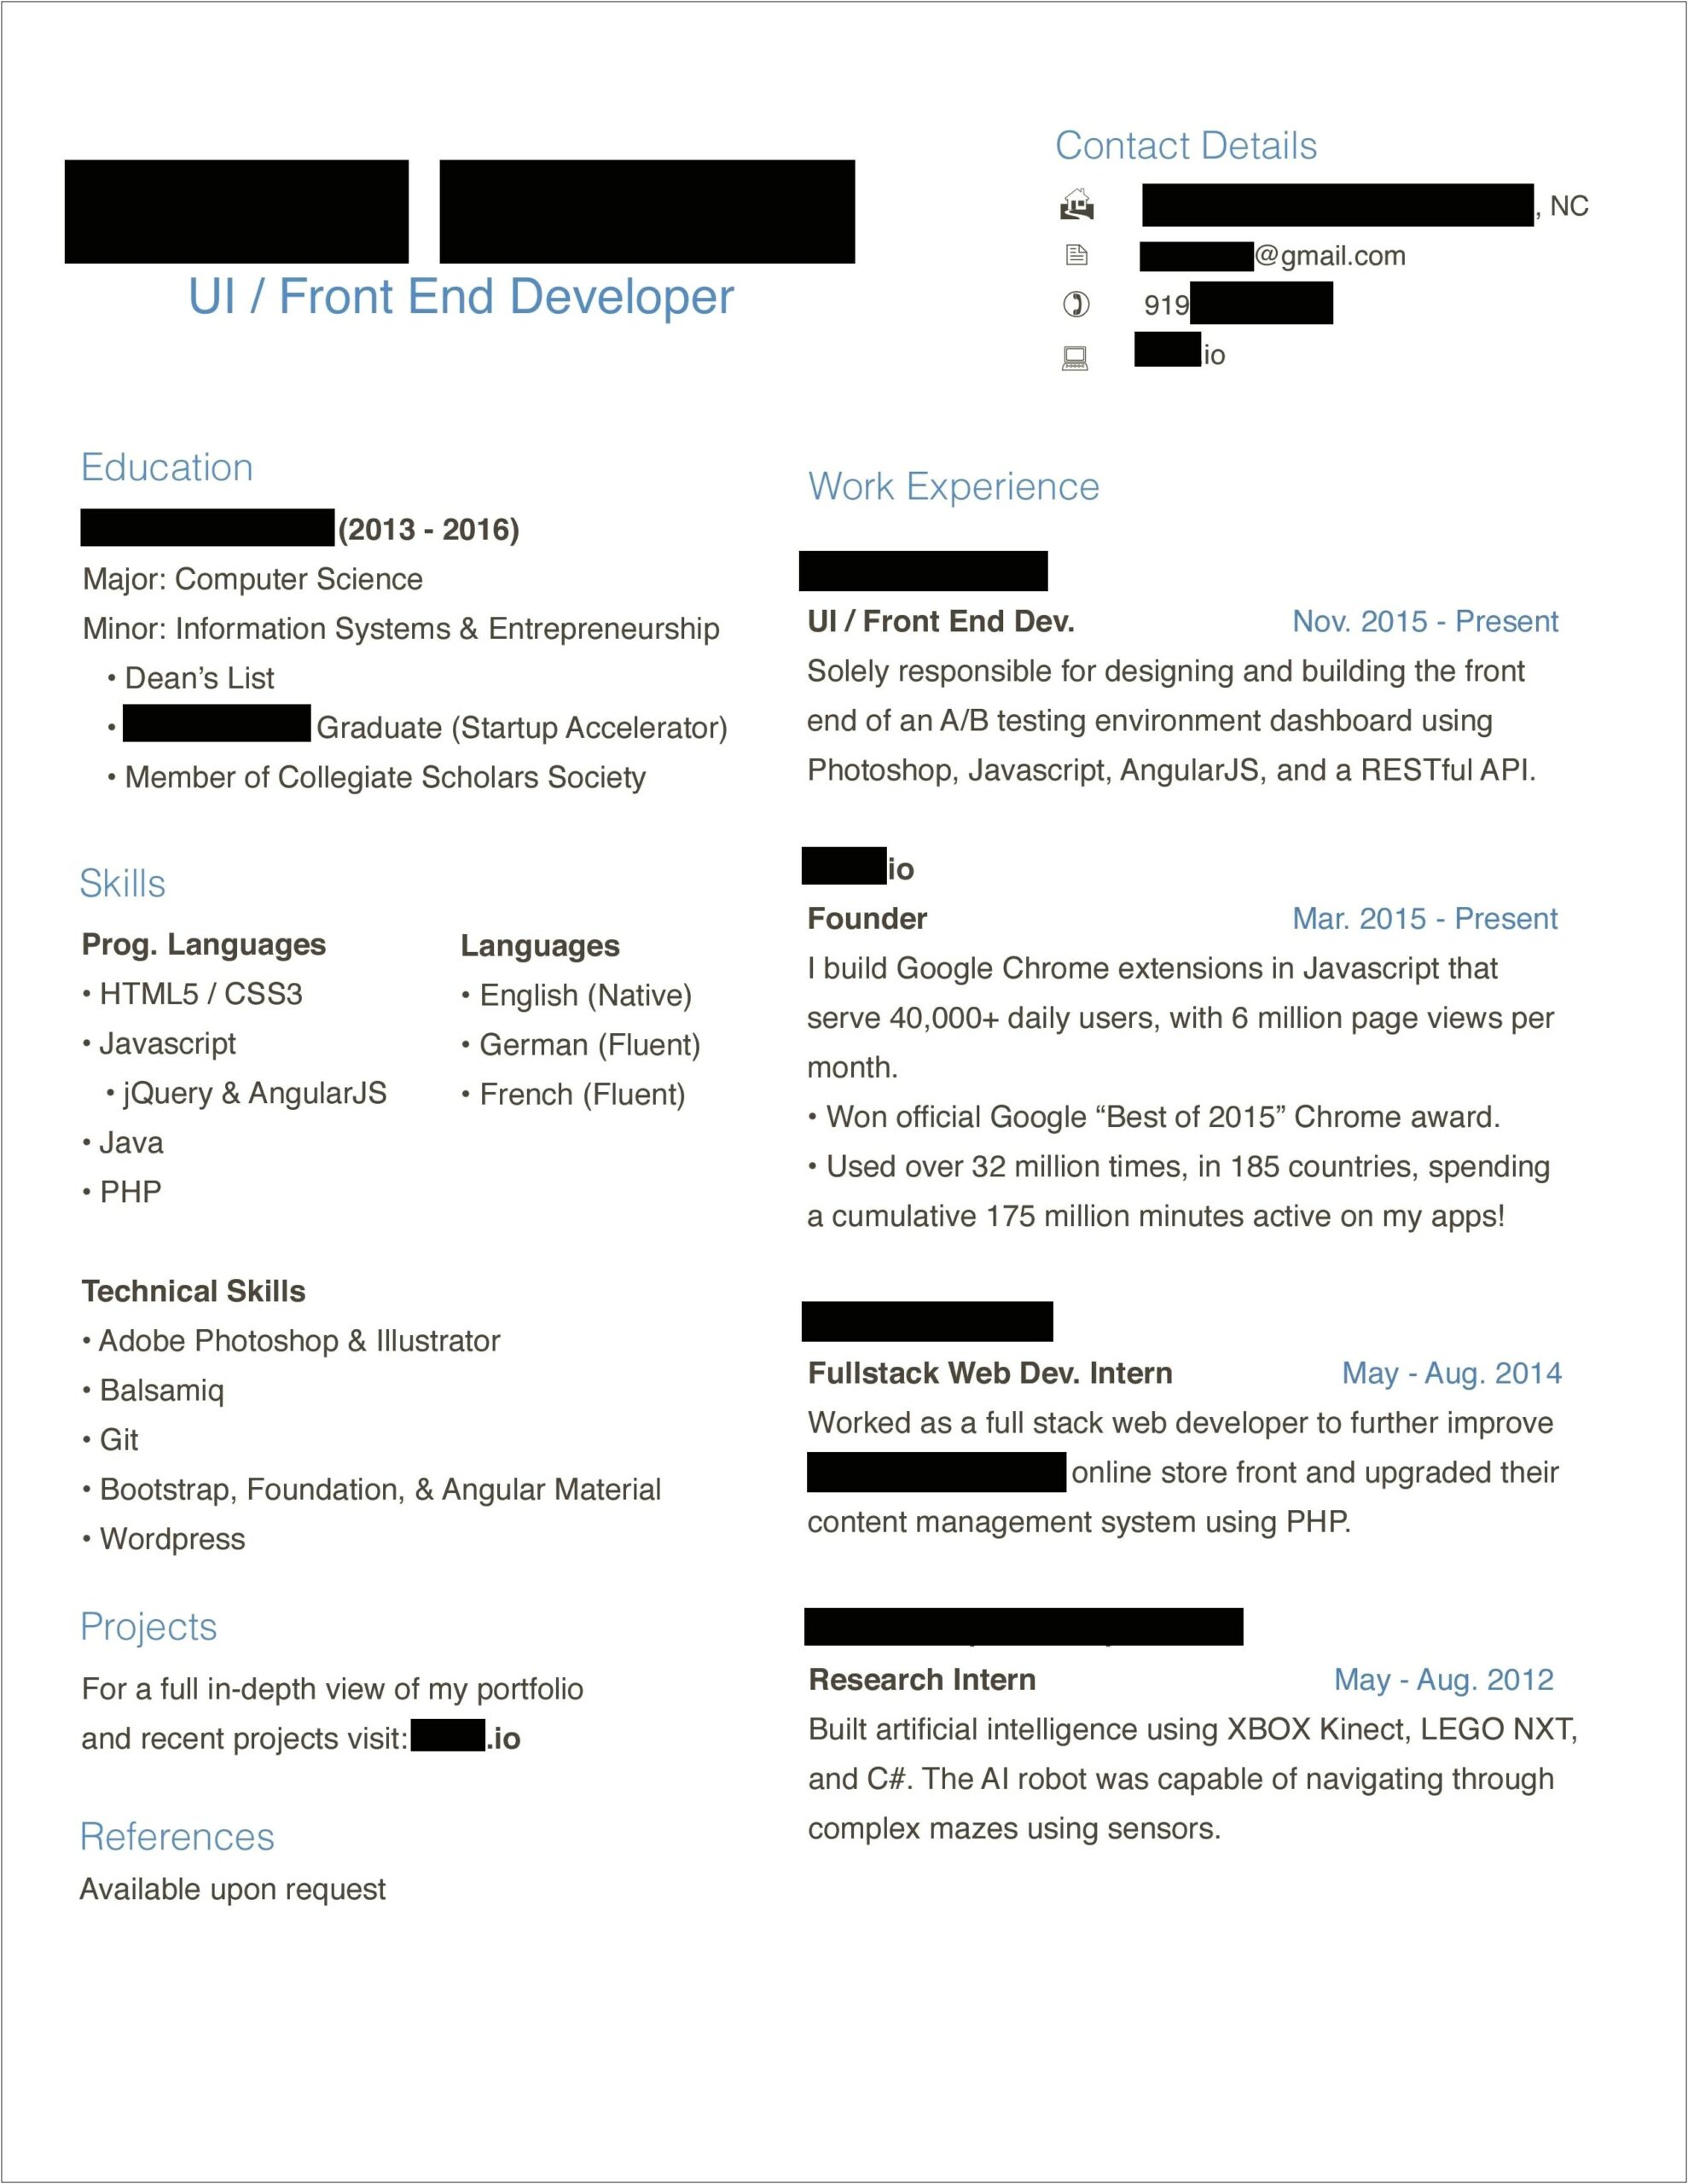 My Job Asked Me For My Resume